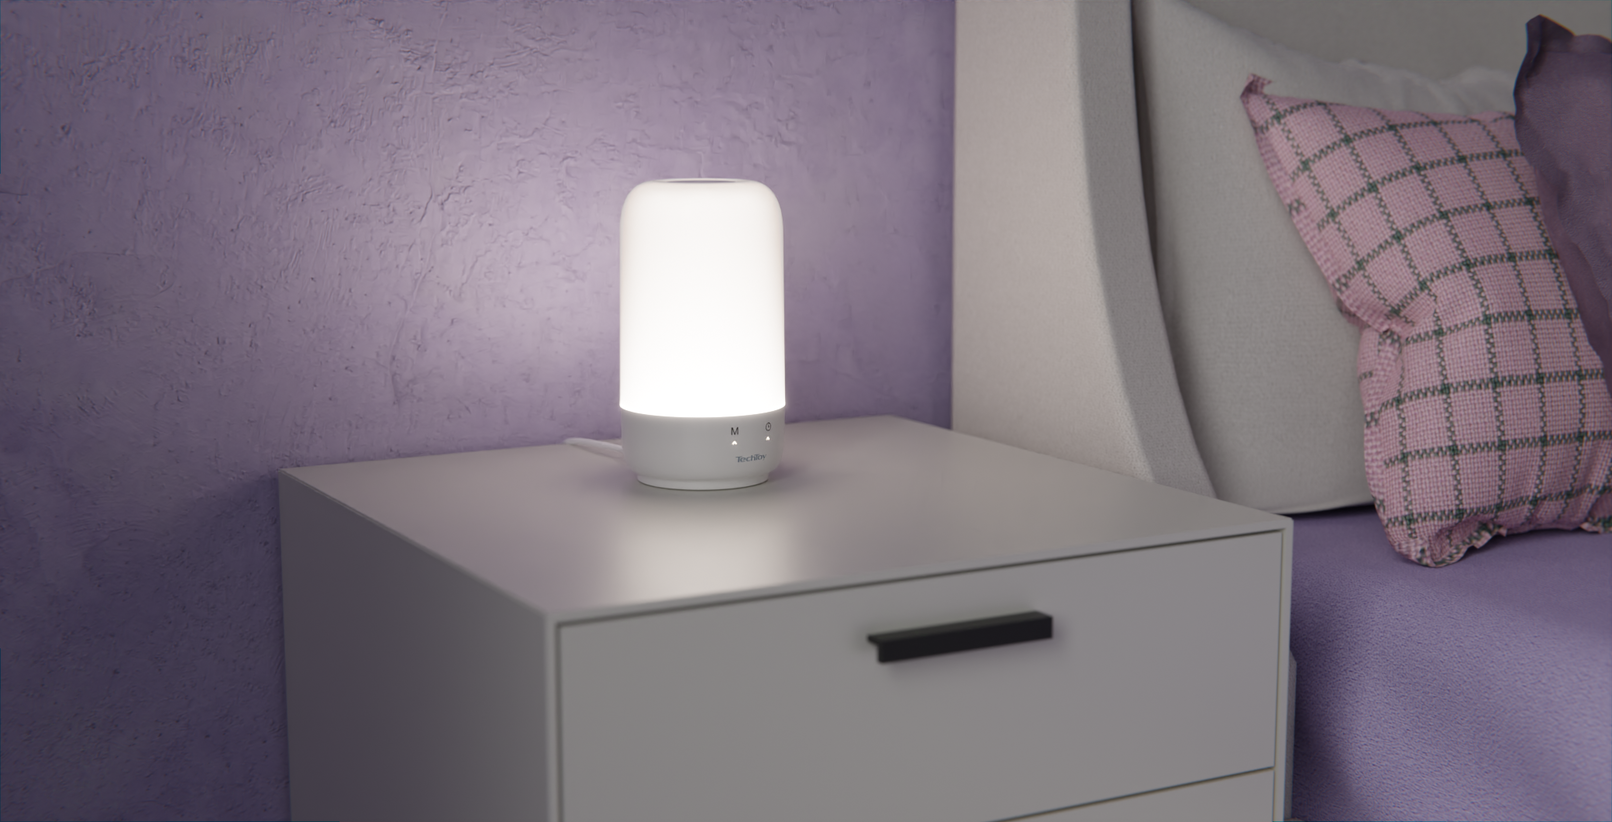 TechToy Smart Table Lamp